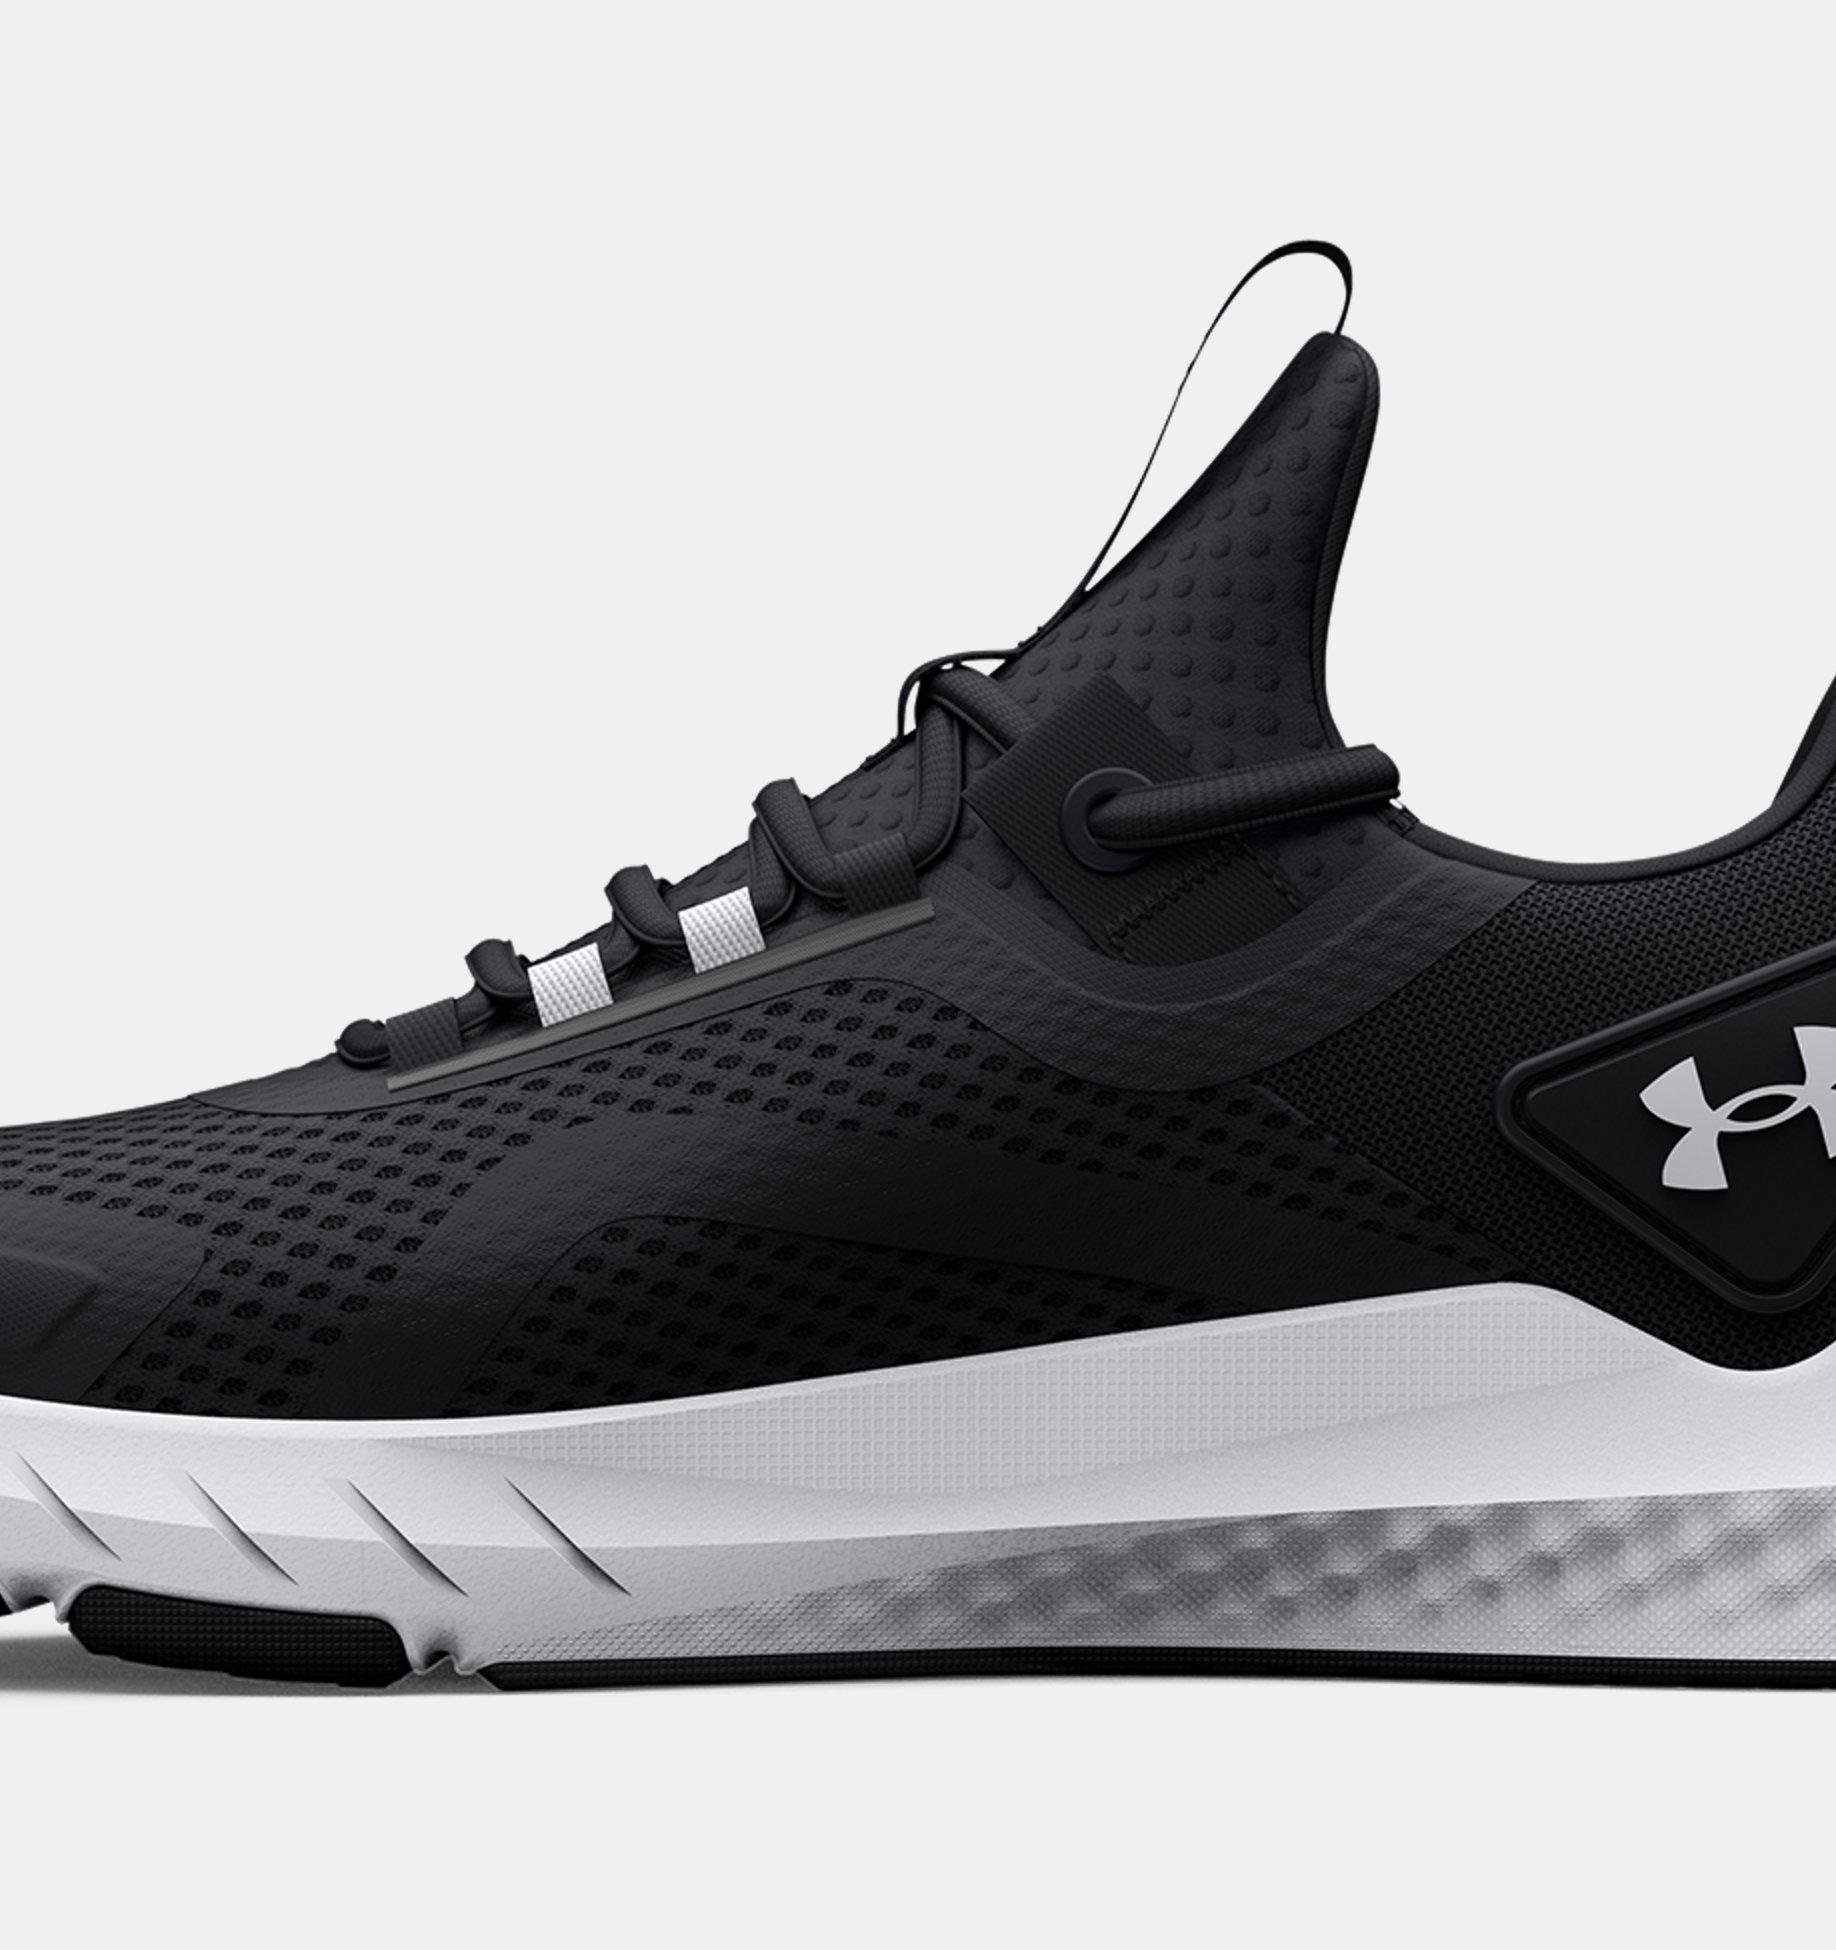 Under Armour Project Rock BSR 3 Men's Sneakers Running Training Workout  Shoes